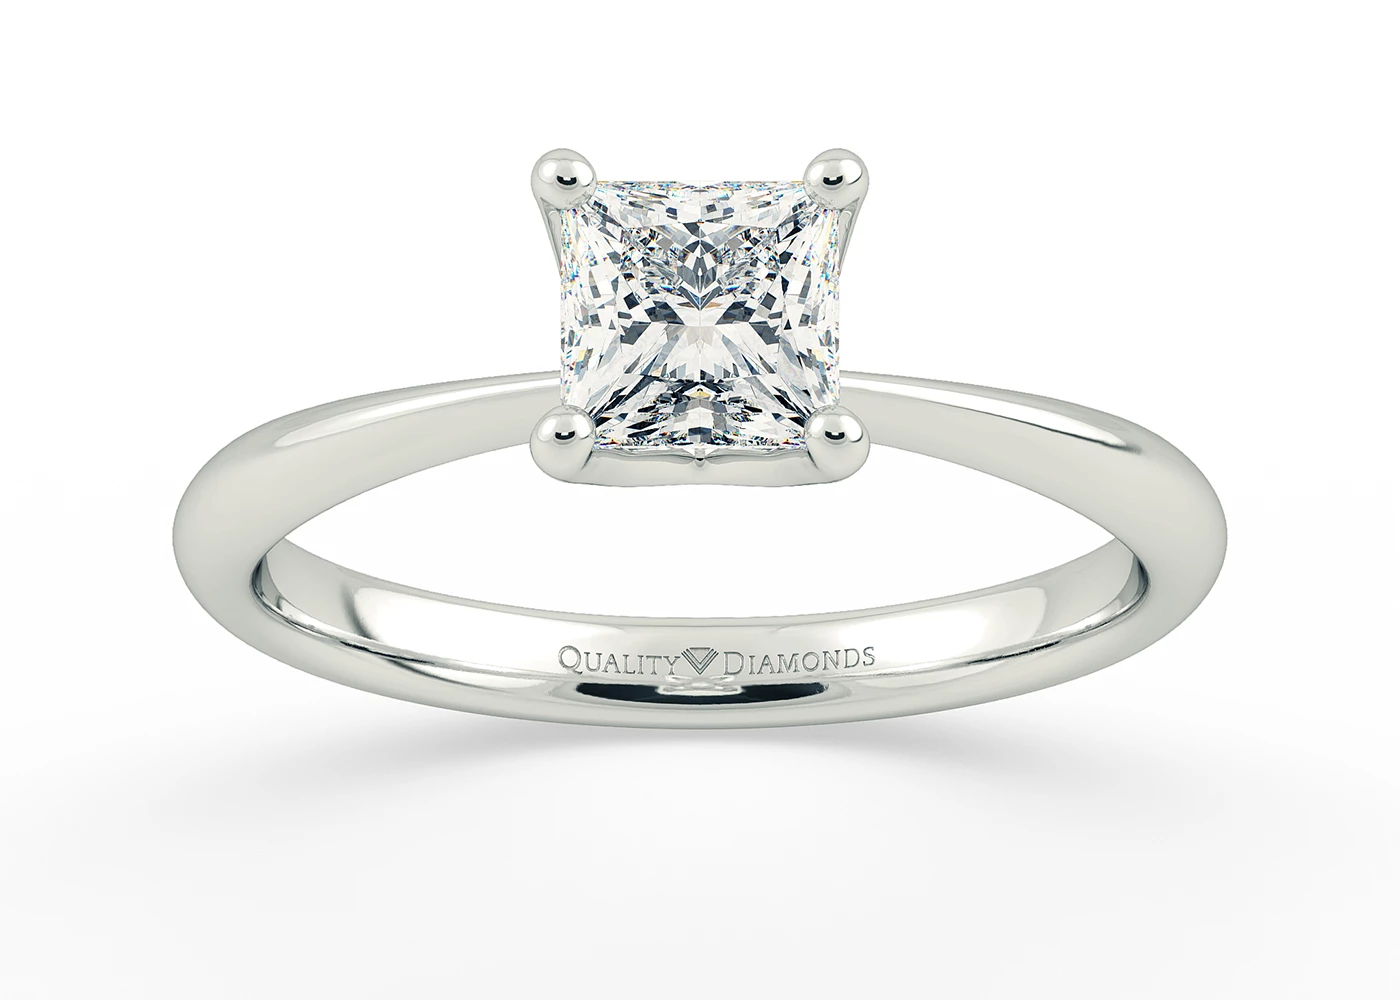 Two Carat Princess Solitaire Diamond Engagement Ring in 9K White Gold